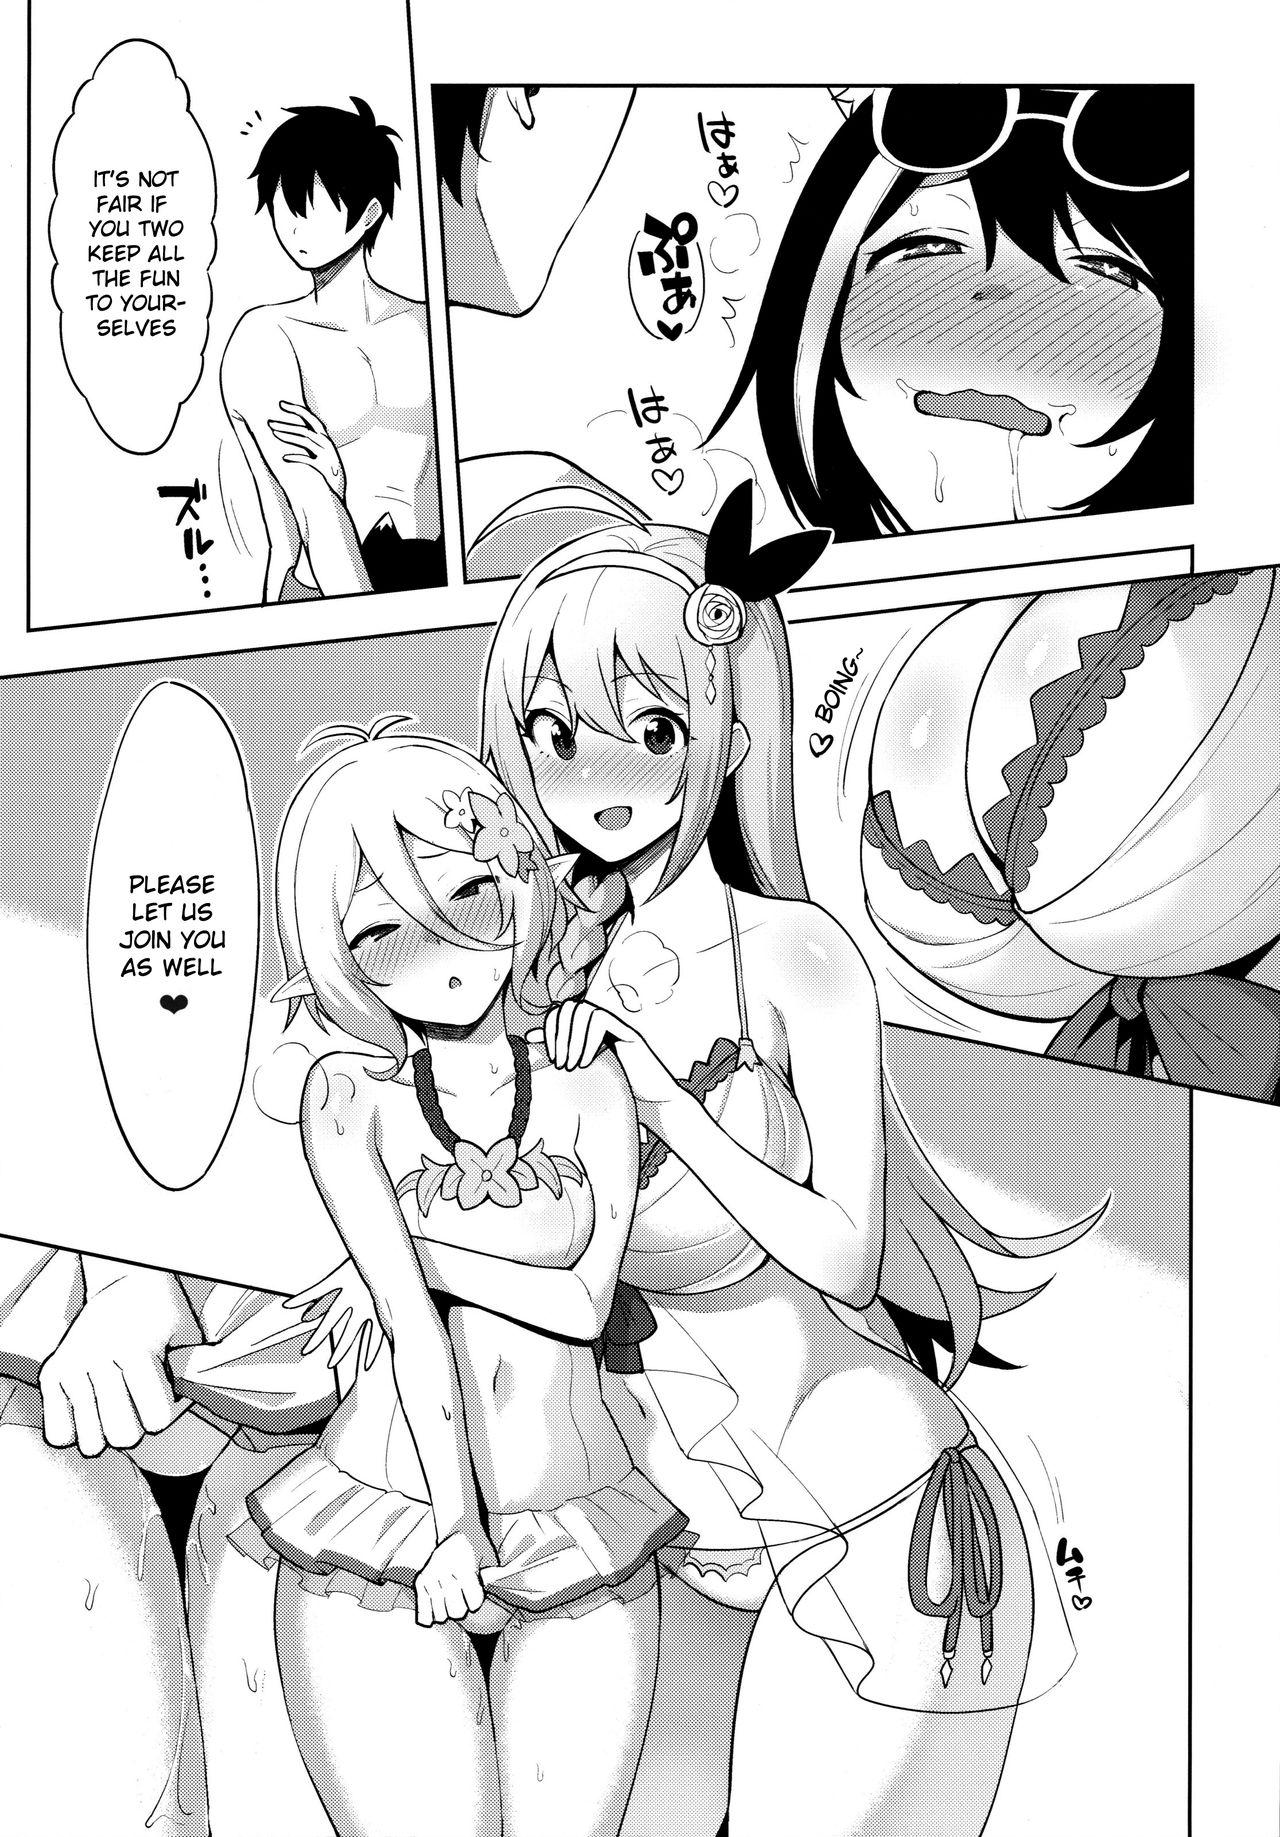 Amateur Blowjob Princess to Connect Shitai! ReDive! | I want to connect with a princess! ReDive! - Princess connect Pussyeating - Page 6